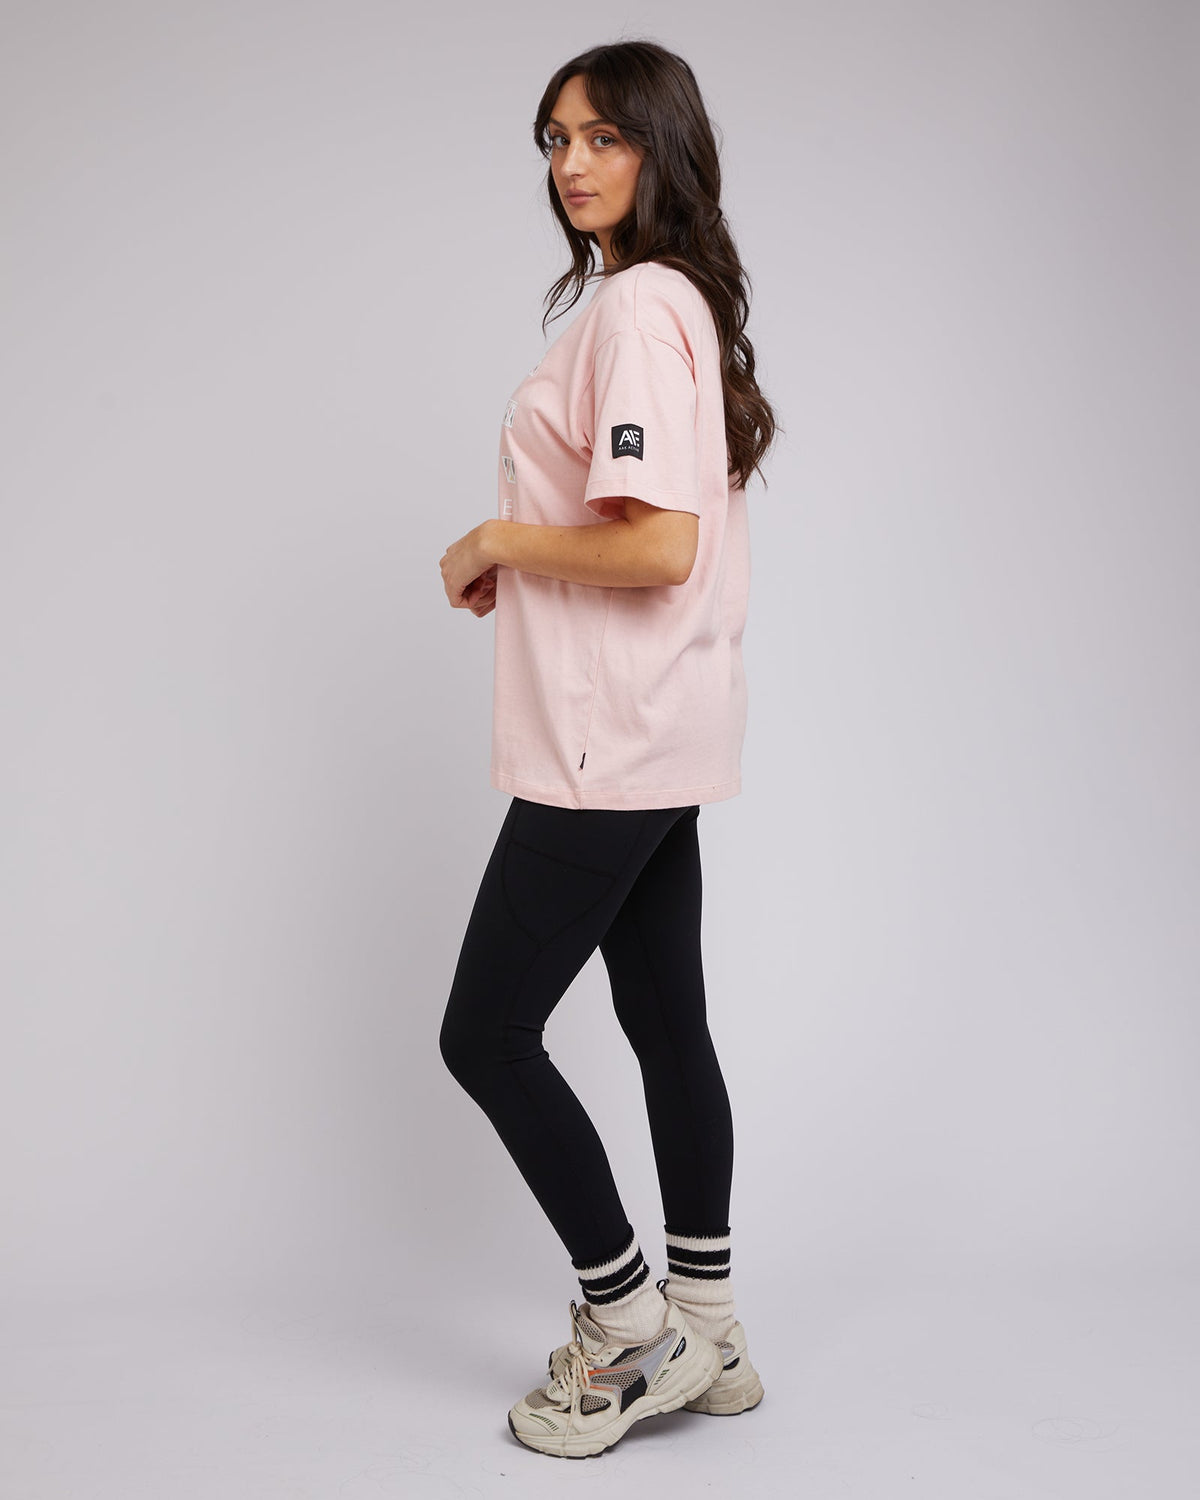 All About Eve-Base Active Tee Pink-Edge Clothing